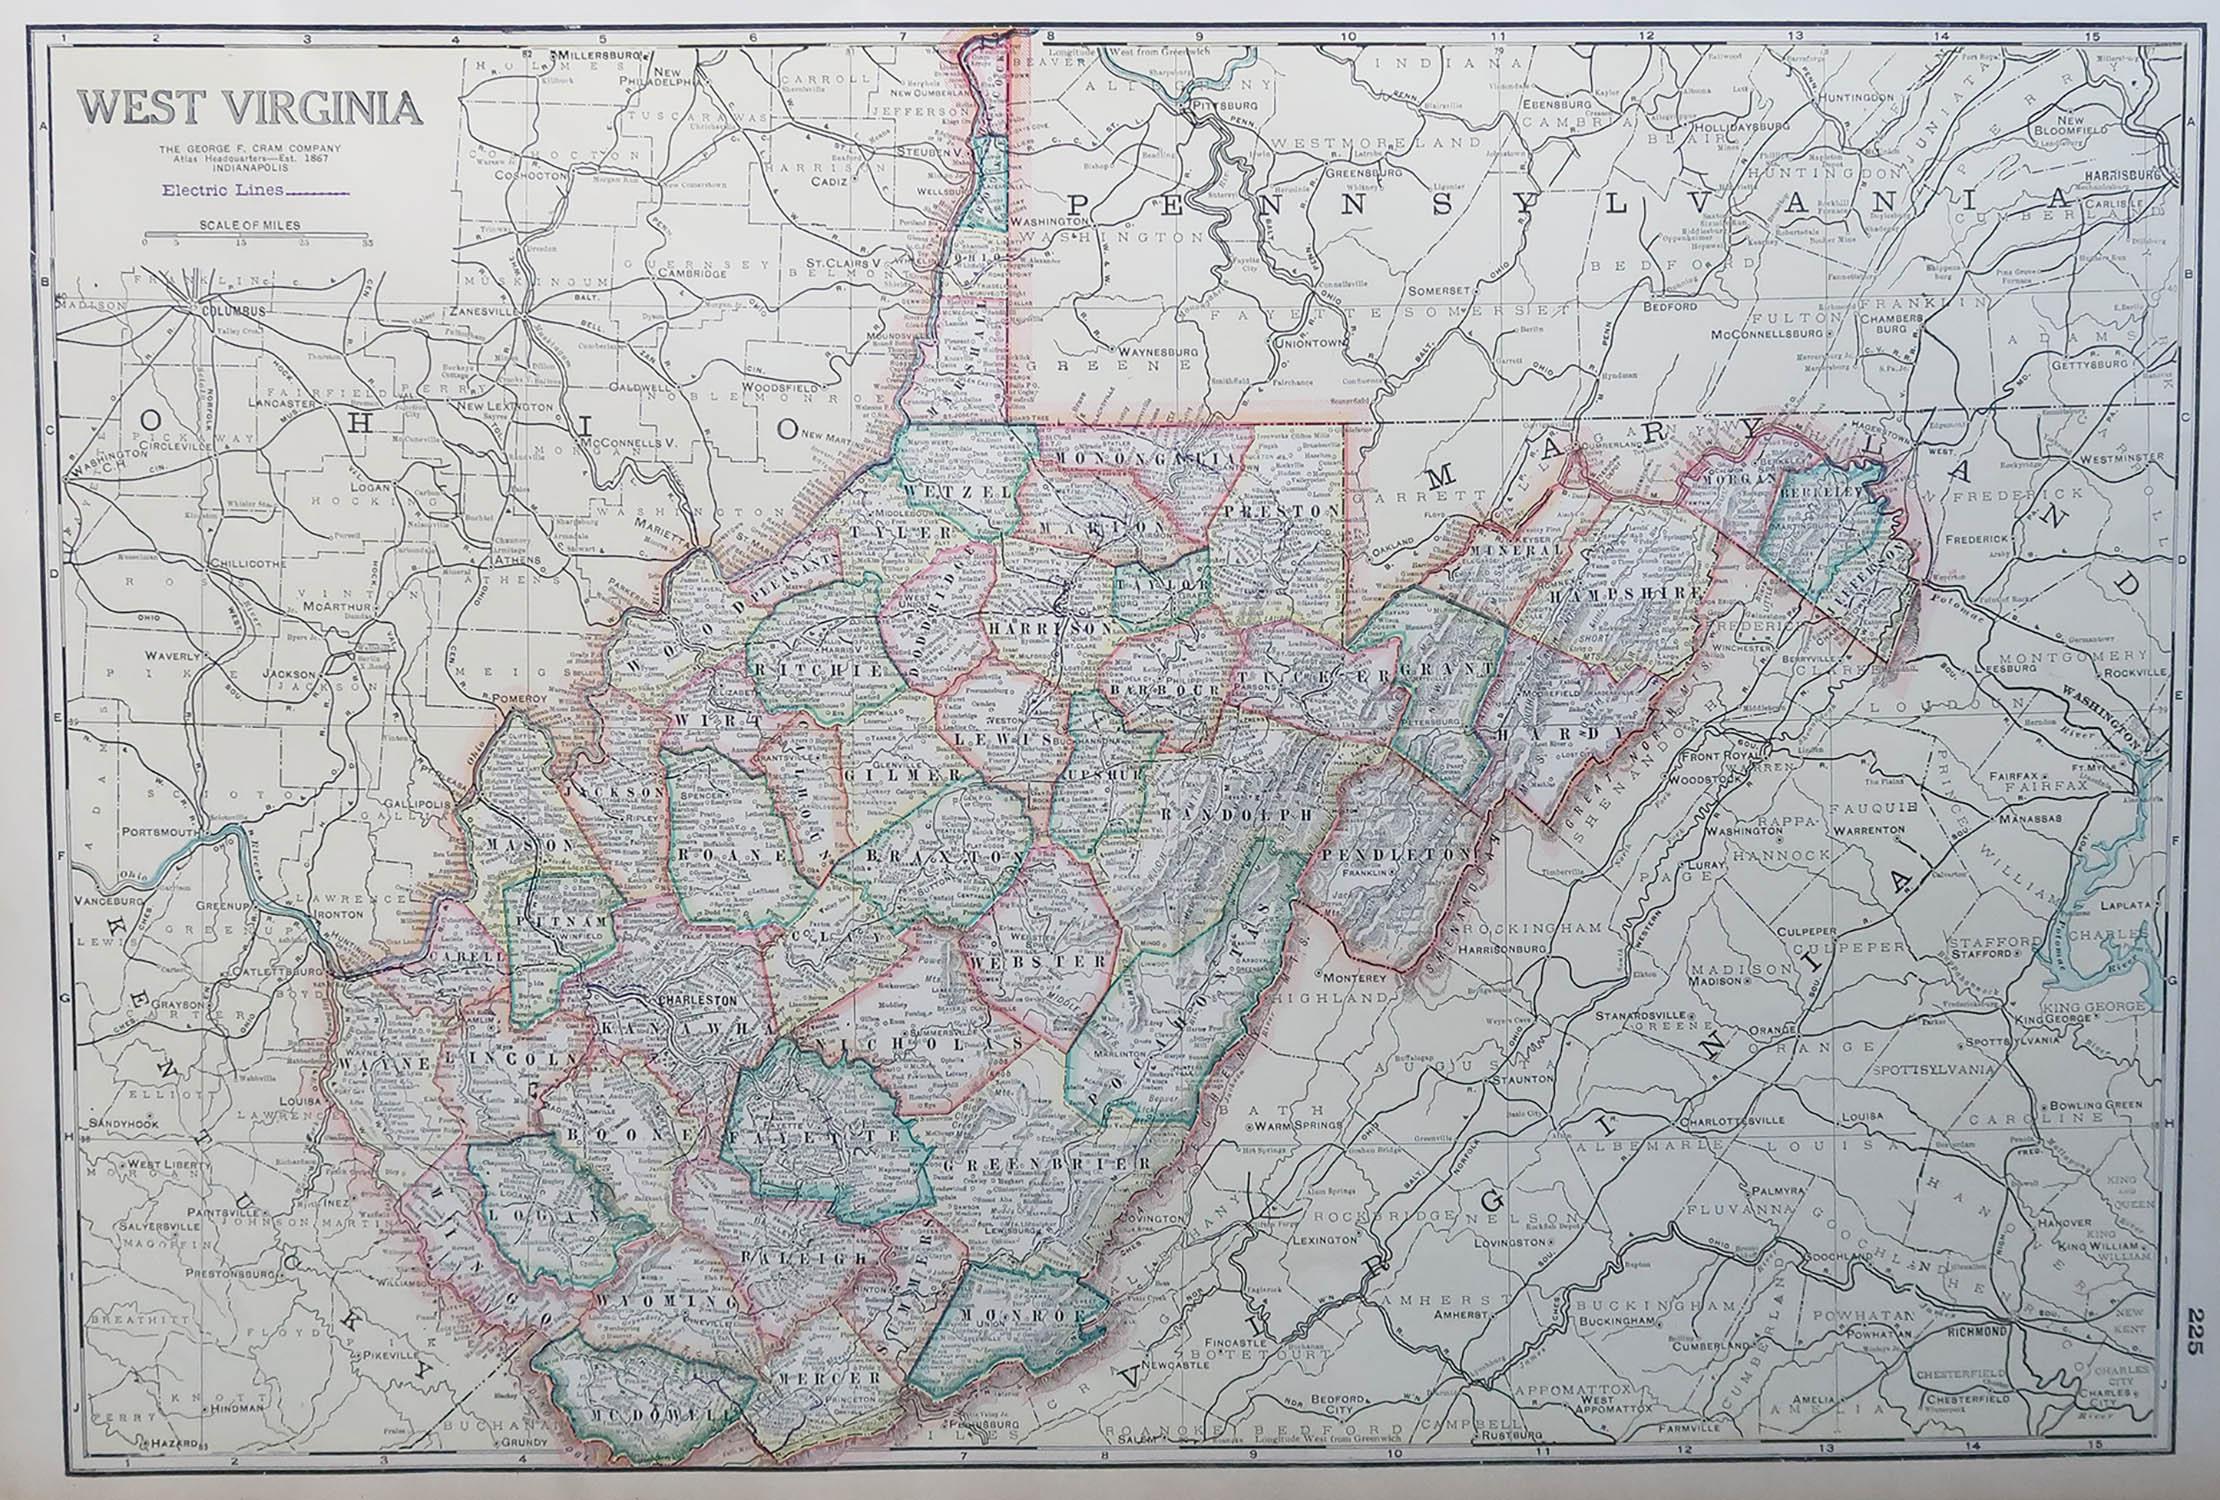 Fabulous map of West Virginia

Original color

Engraved and printed by the George F. Cram Company, Indianapolis.

Published, C.1900

Unframed

Free shipping.